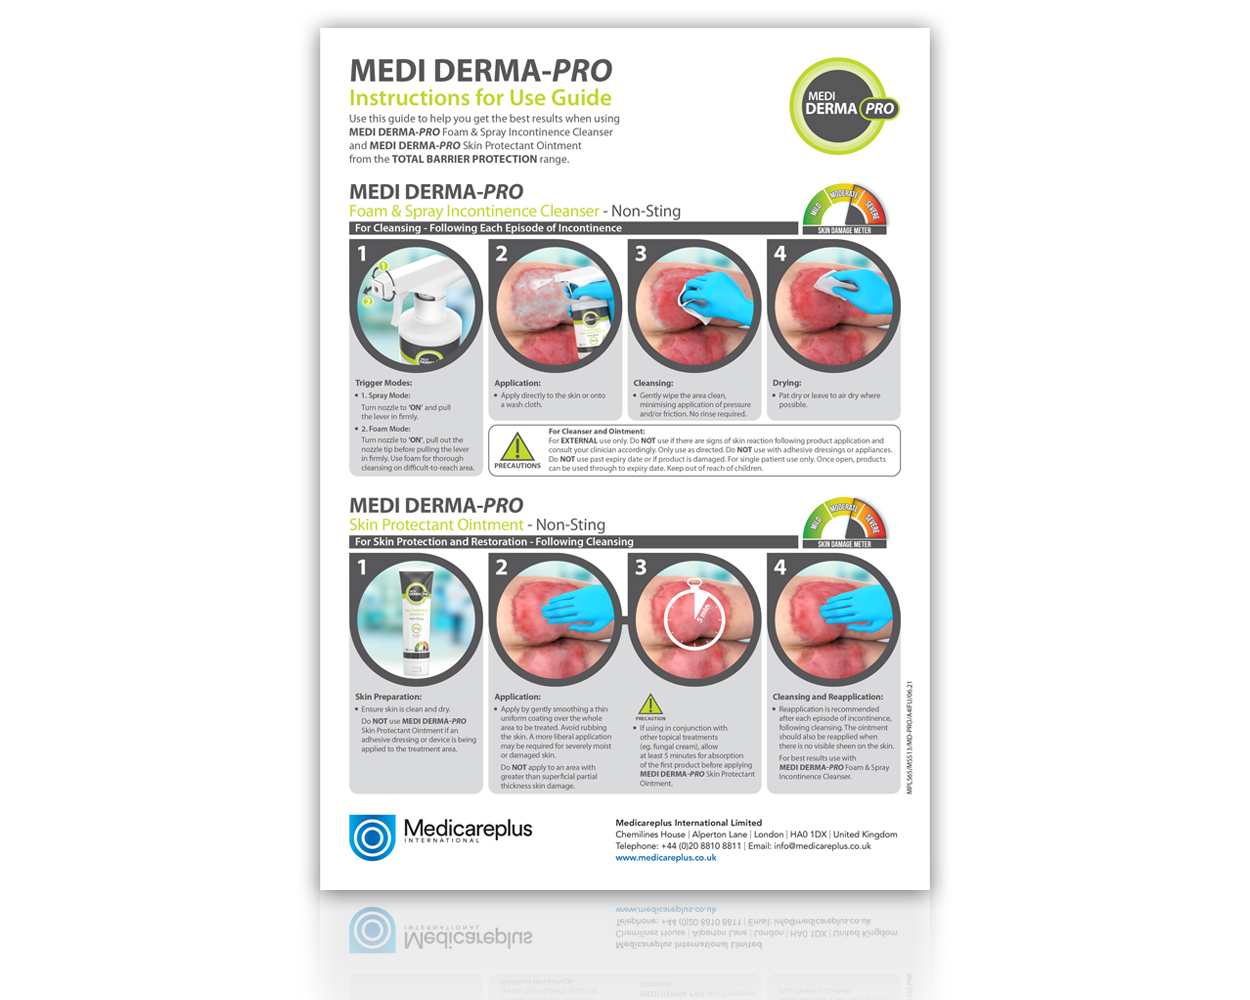 Medi Derma-PRO Ointment and Cleanser - Instructions for use guide